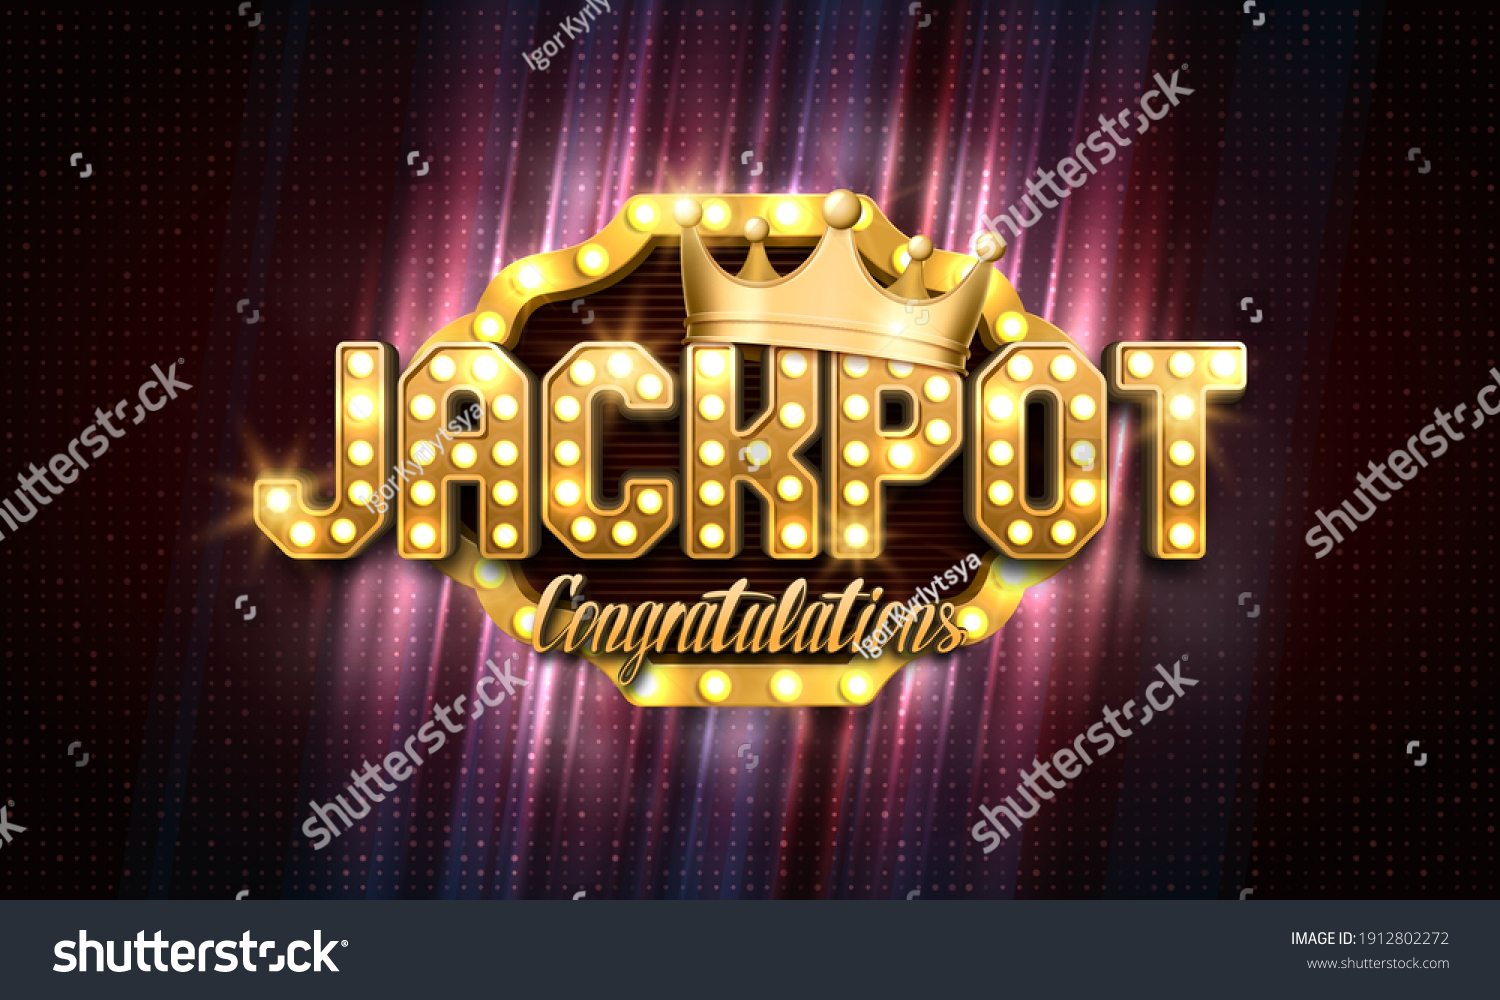 Shining sign Jackpot with golden crown on a bright background. Vector illustration.  #1912802272